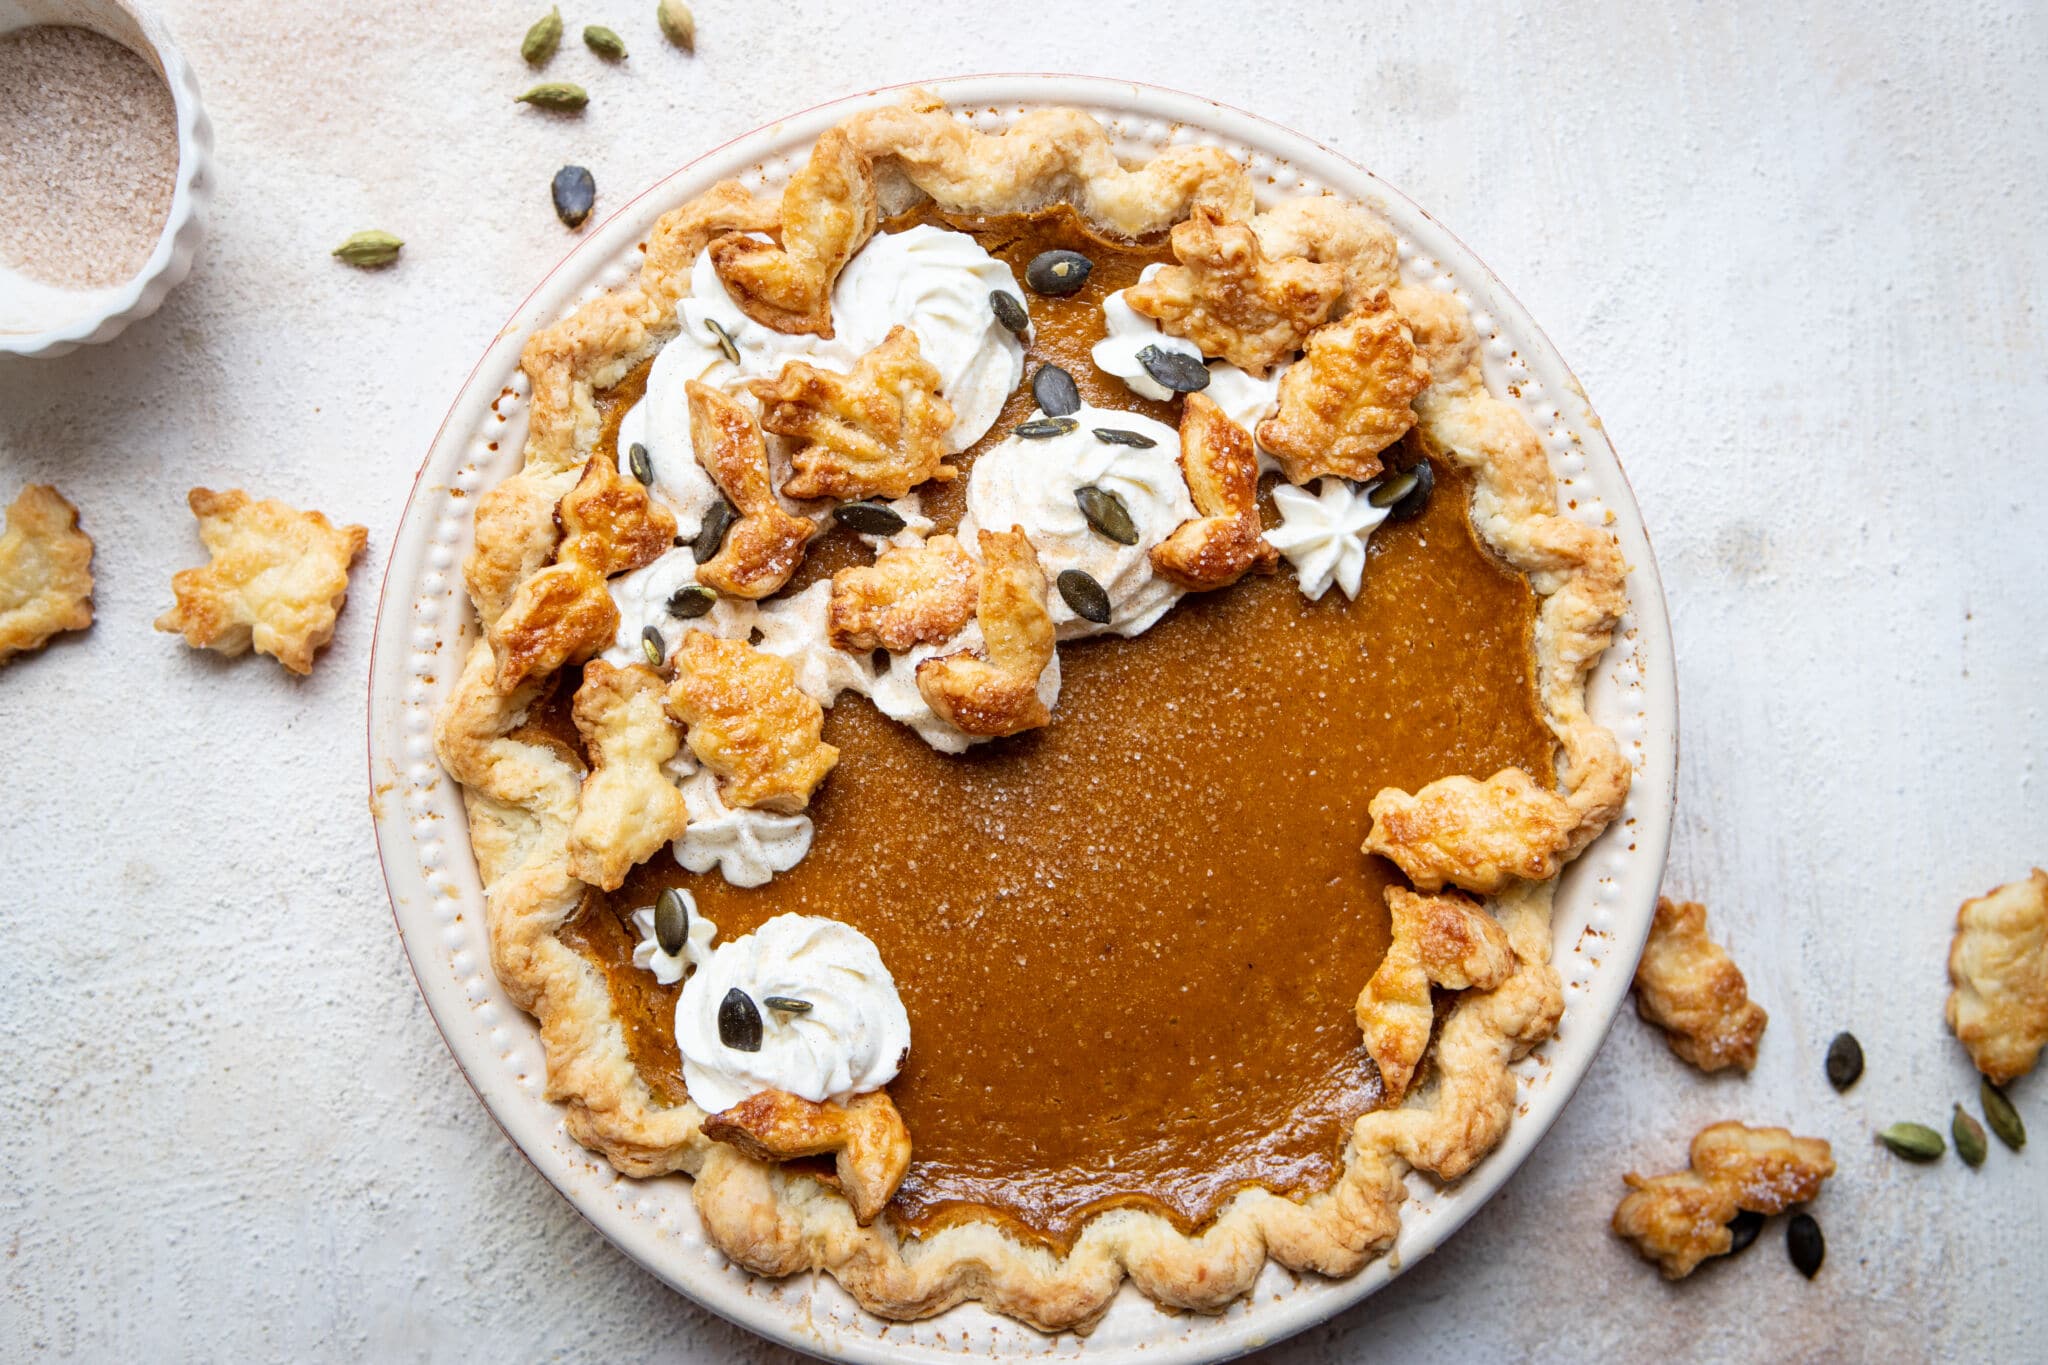 Chai pumpkin pie from overhead, with a scalloped, flaky crust and topped with crust leaf designs, whipped cream, and pumpkin seeds, nest to a small glass bowl of cinnamon sugar on a white table.